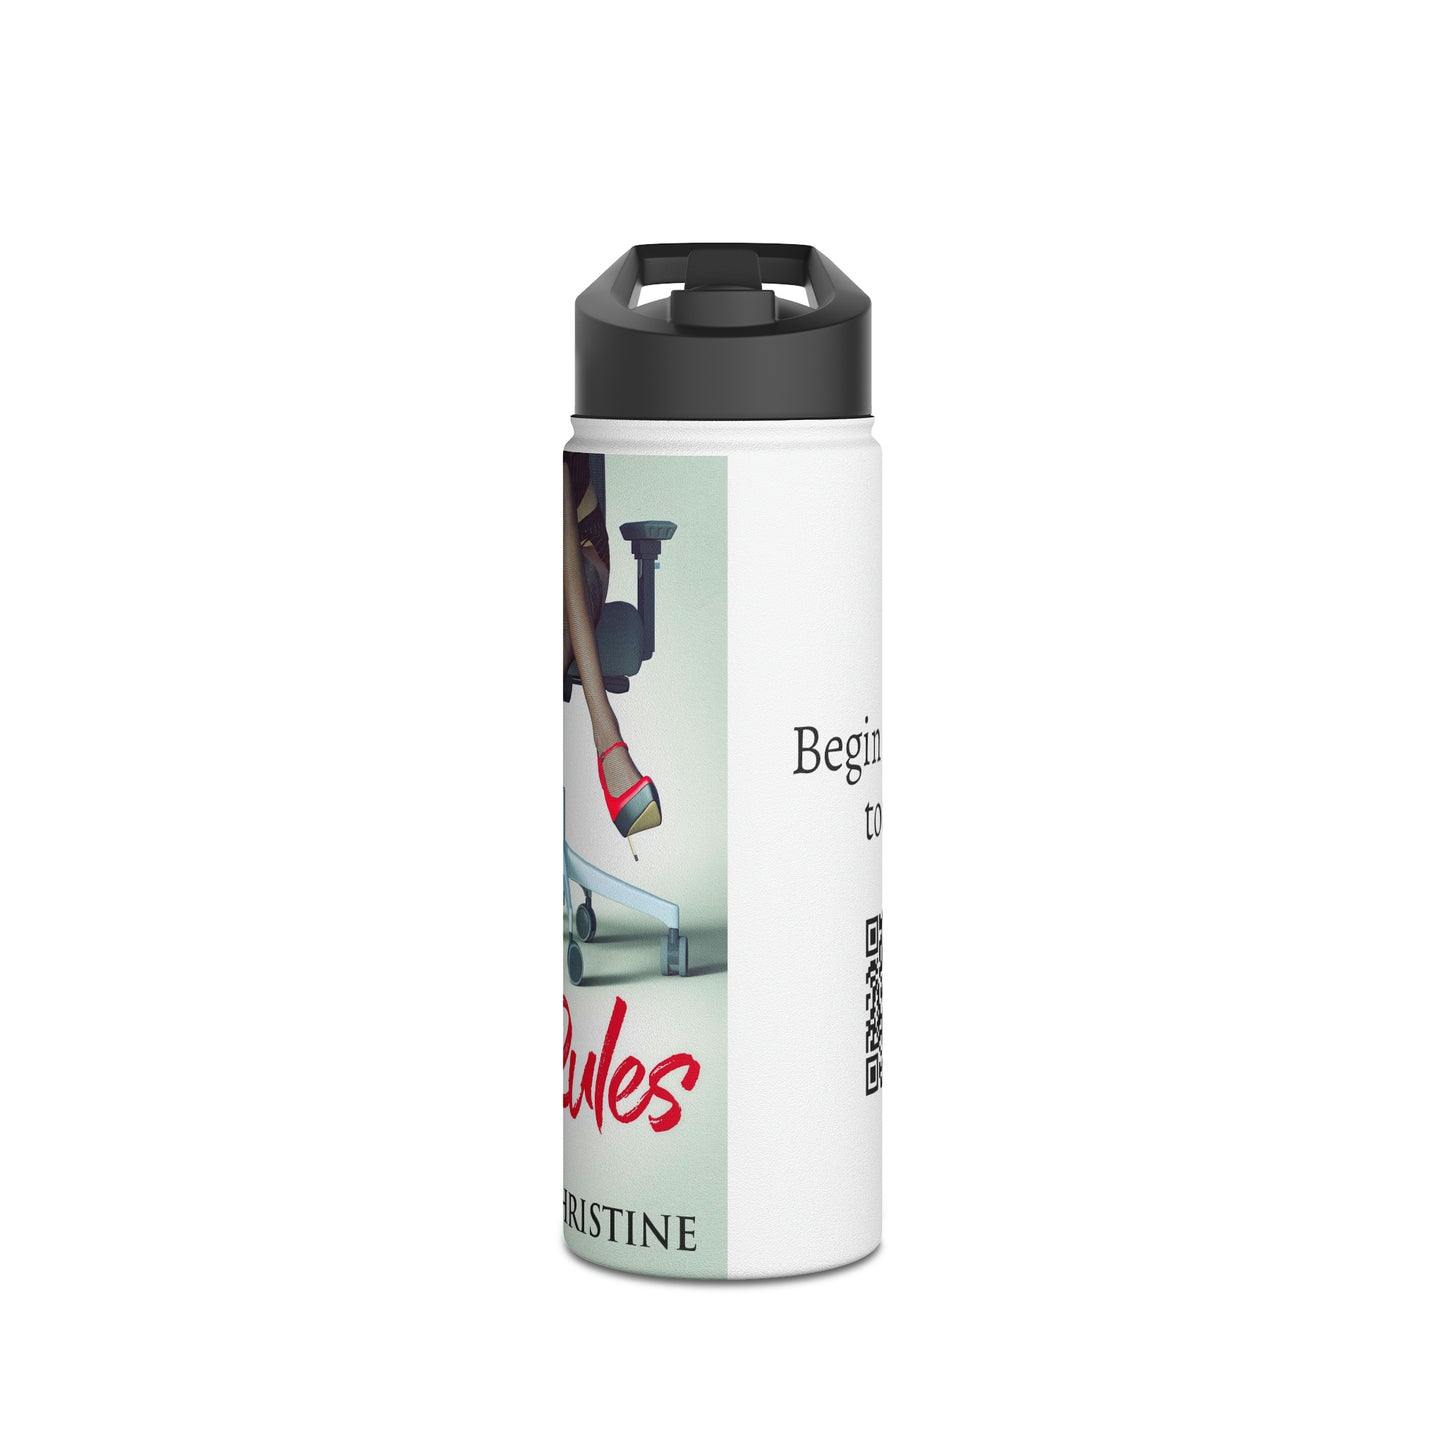 No Rules - Stainless Steel Water Bottle